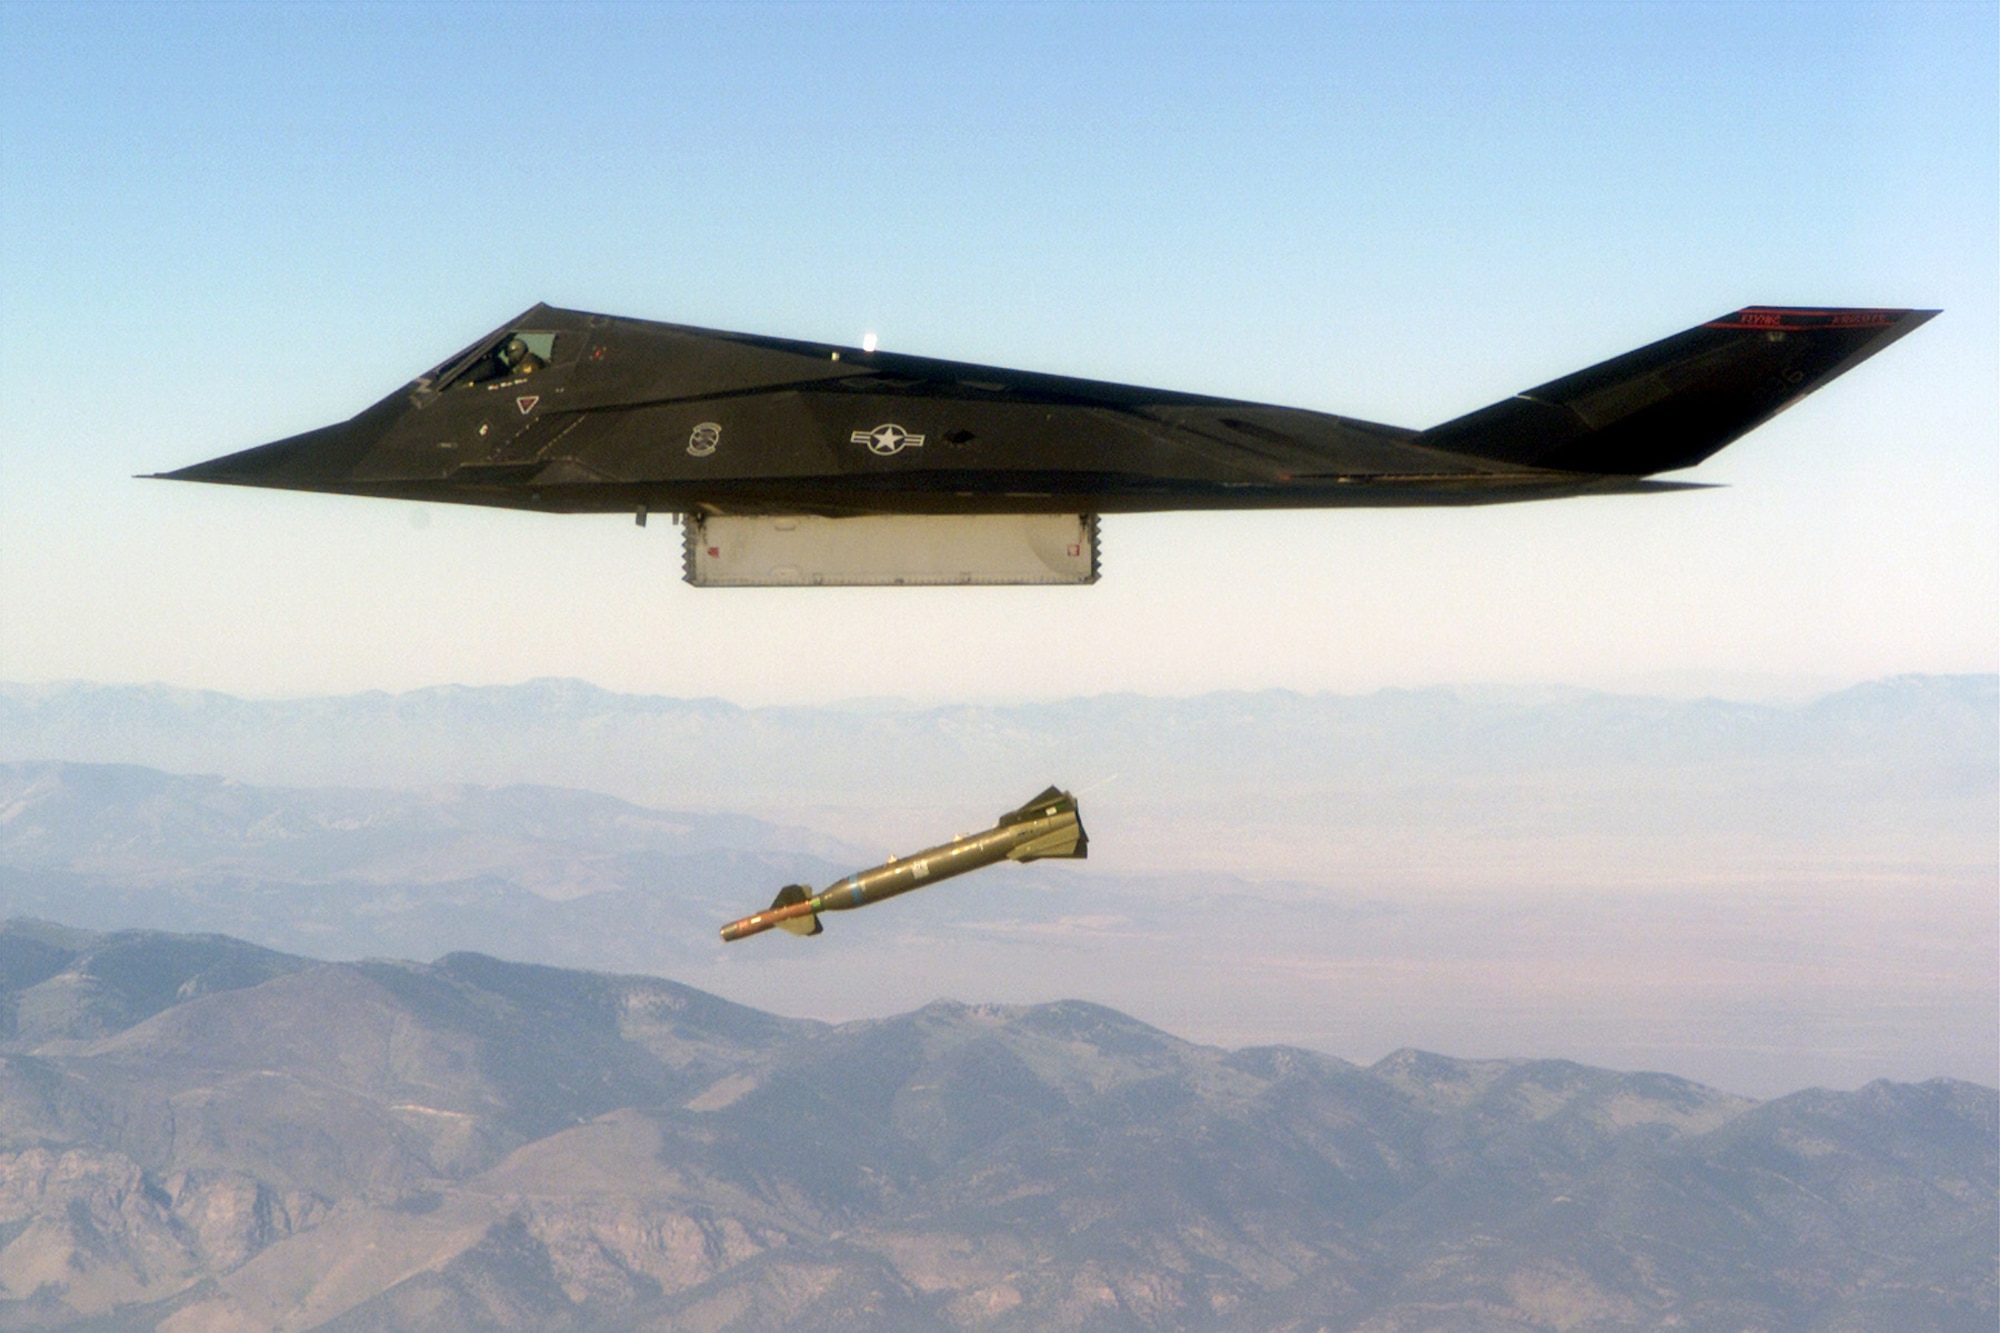 An F-117 Nighthawk engages it's target and drops a GBU-28 guided bomb unit during the 'live-fire' weapons testing mission COMBAT HAMMER, at Hill Air Force Base, Utah.